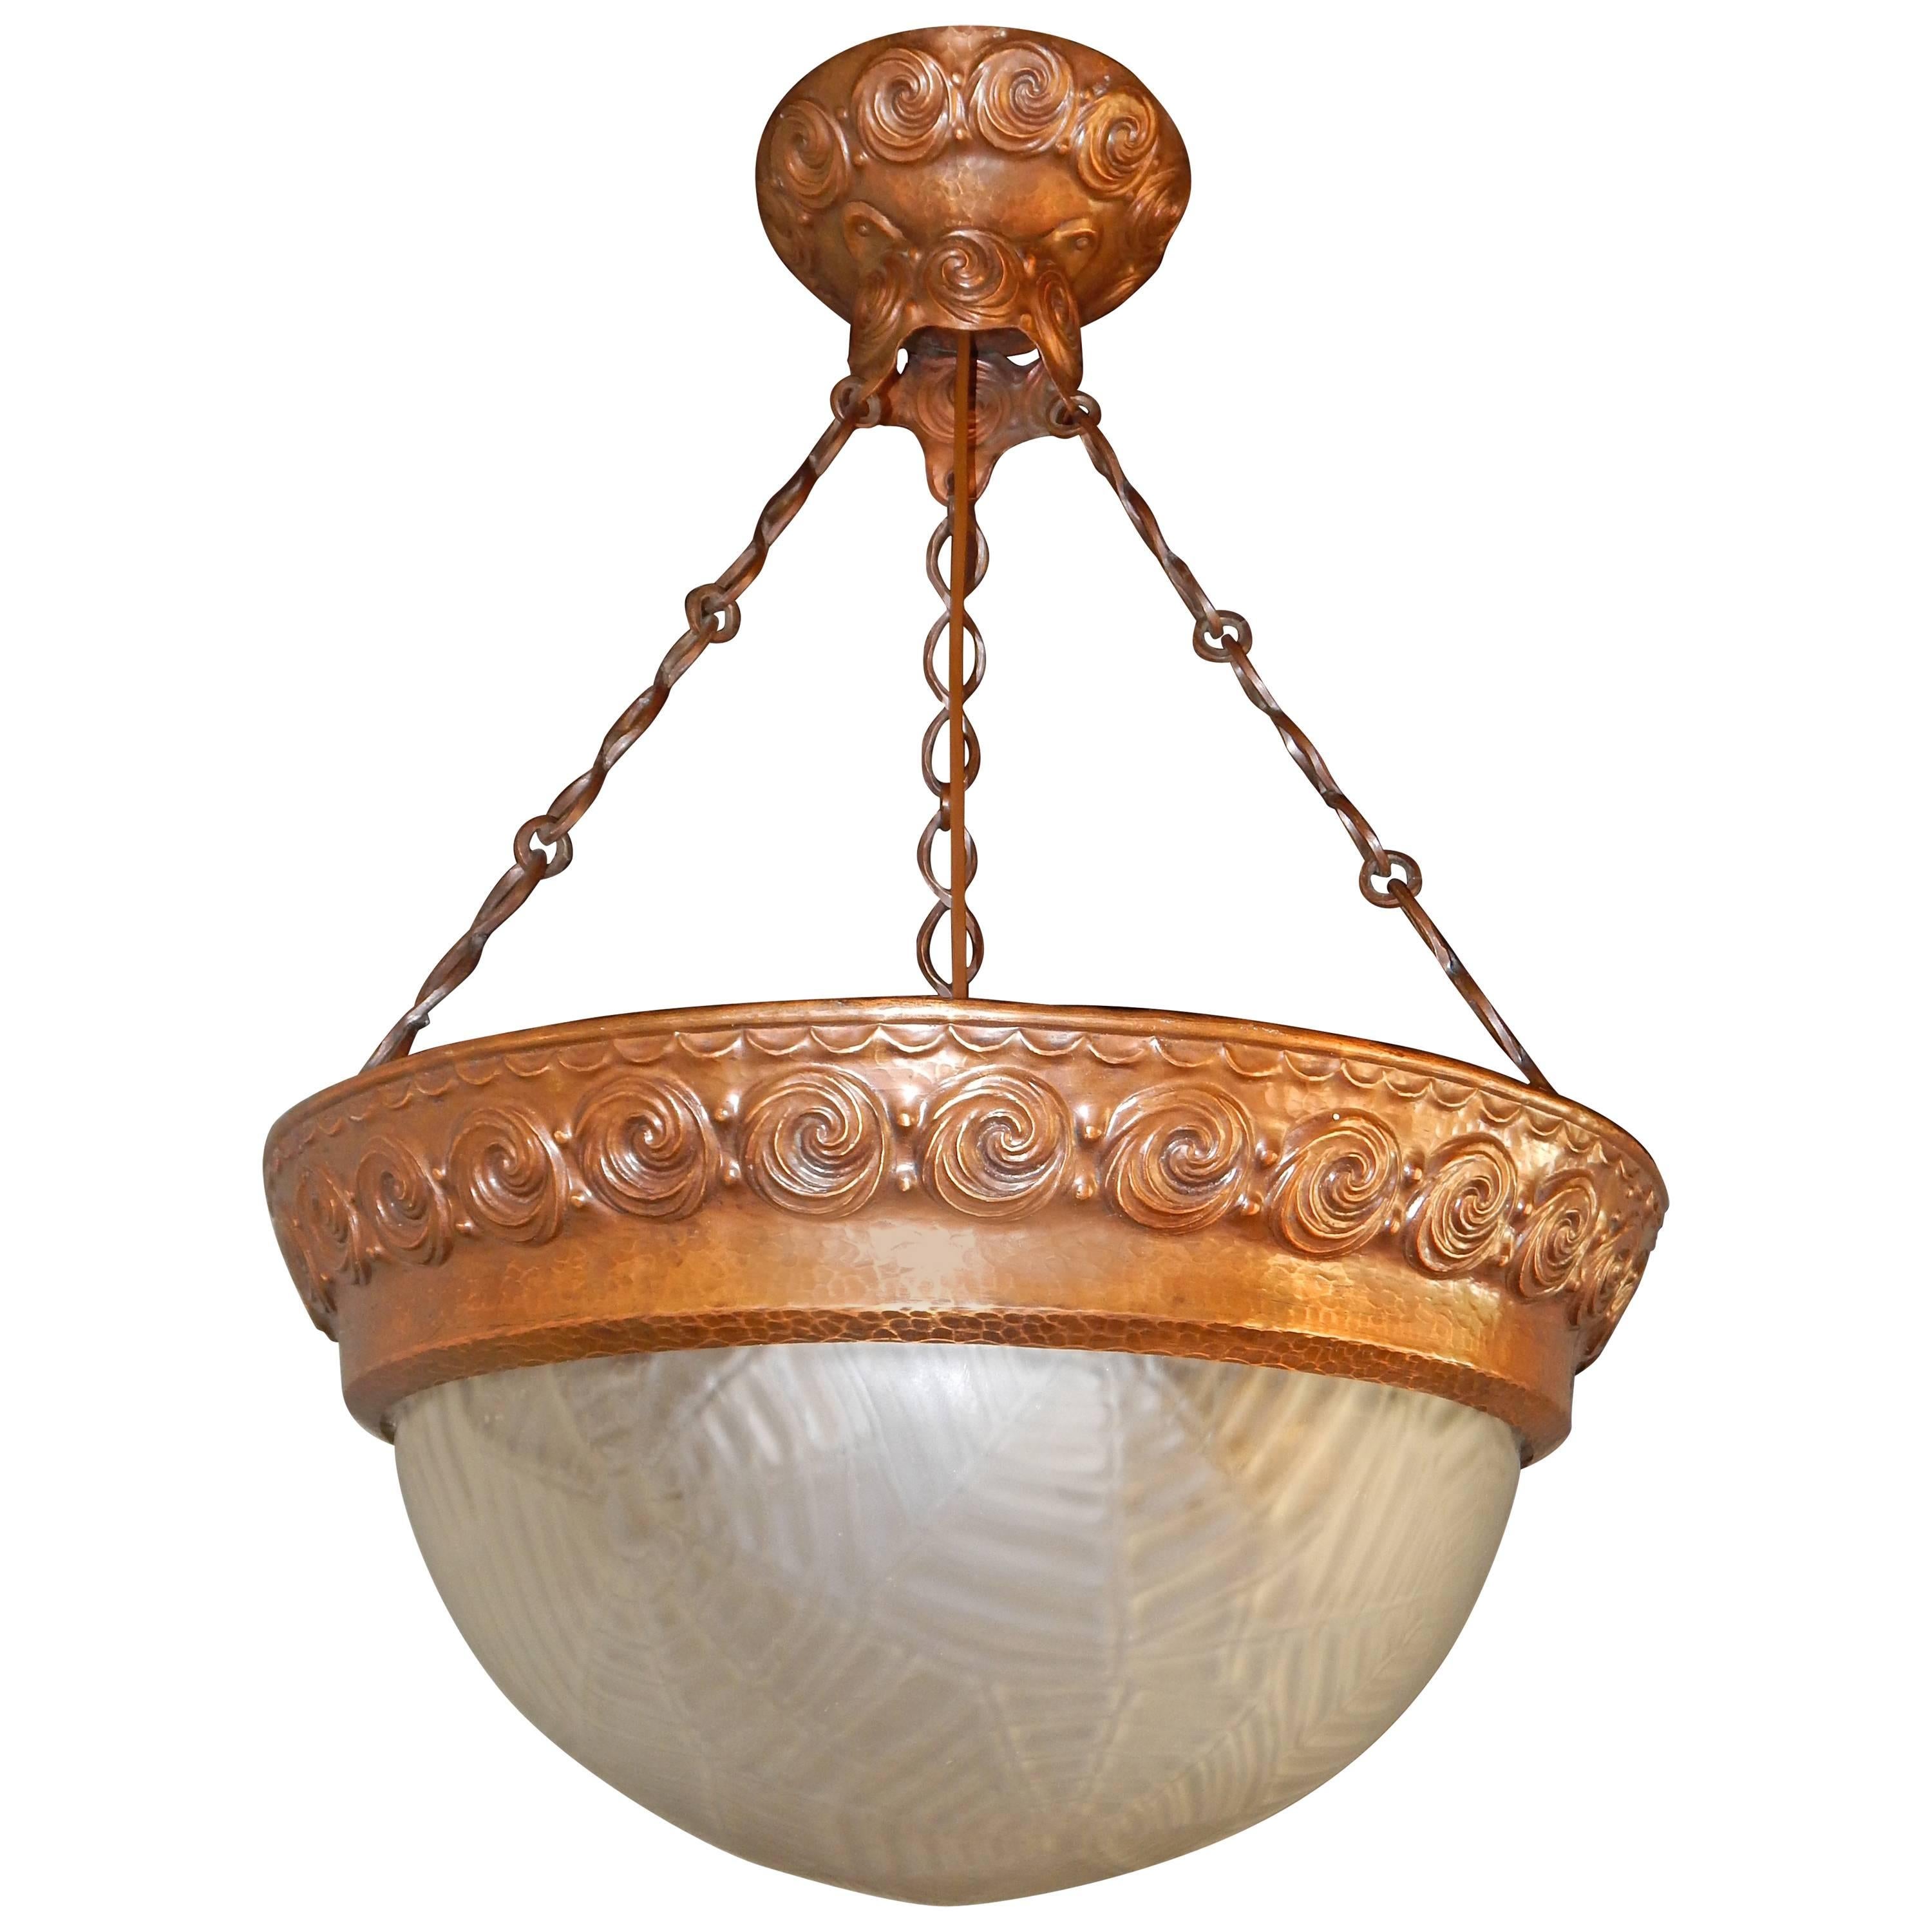 Swedish Arts and Crafts Hand Hammered Copper Hanging Fixture, circa 1910